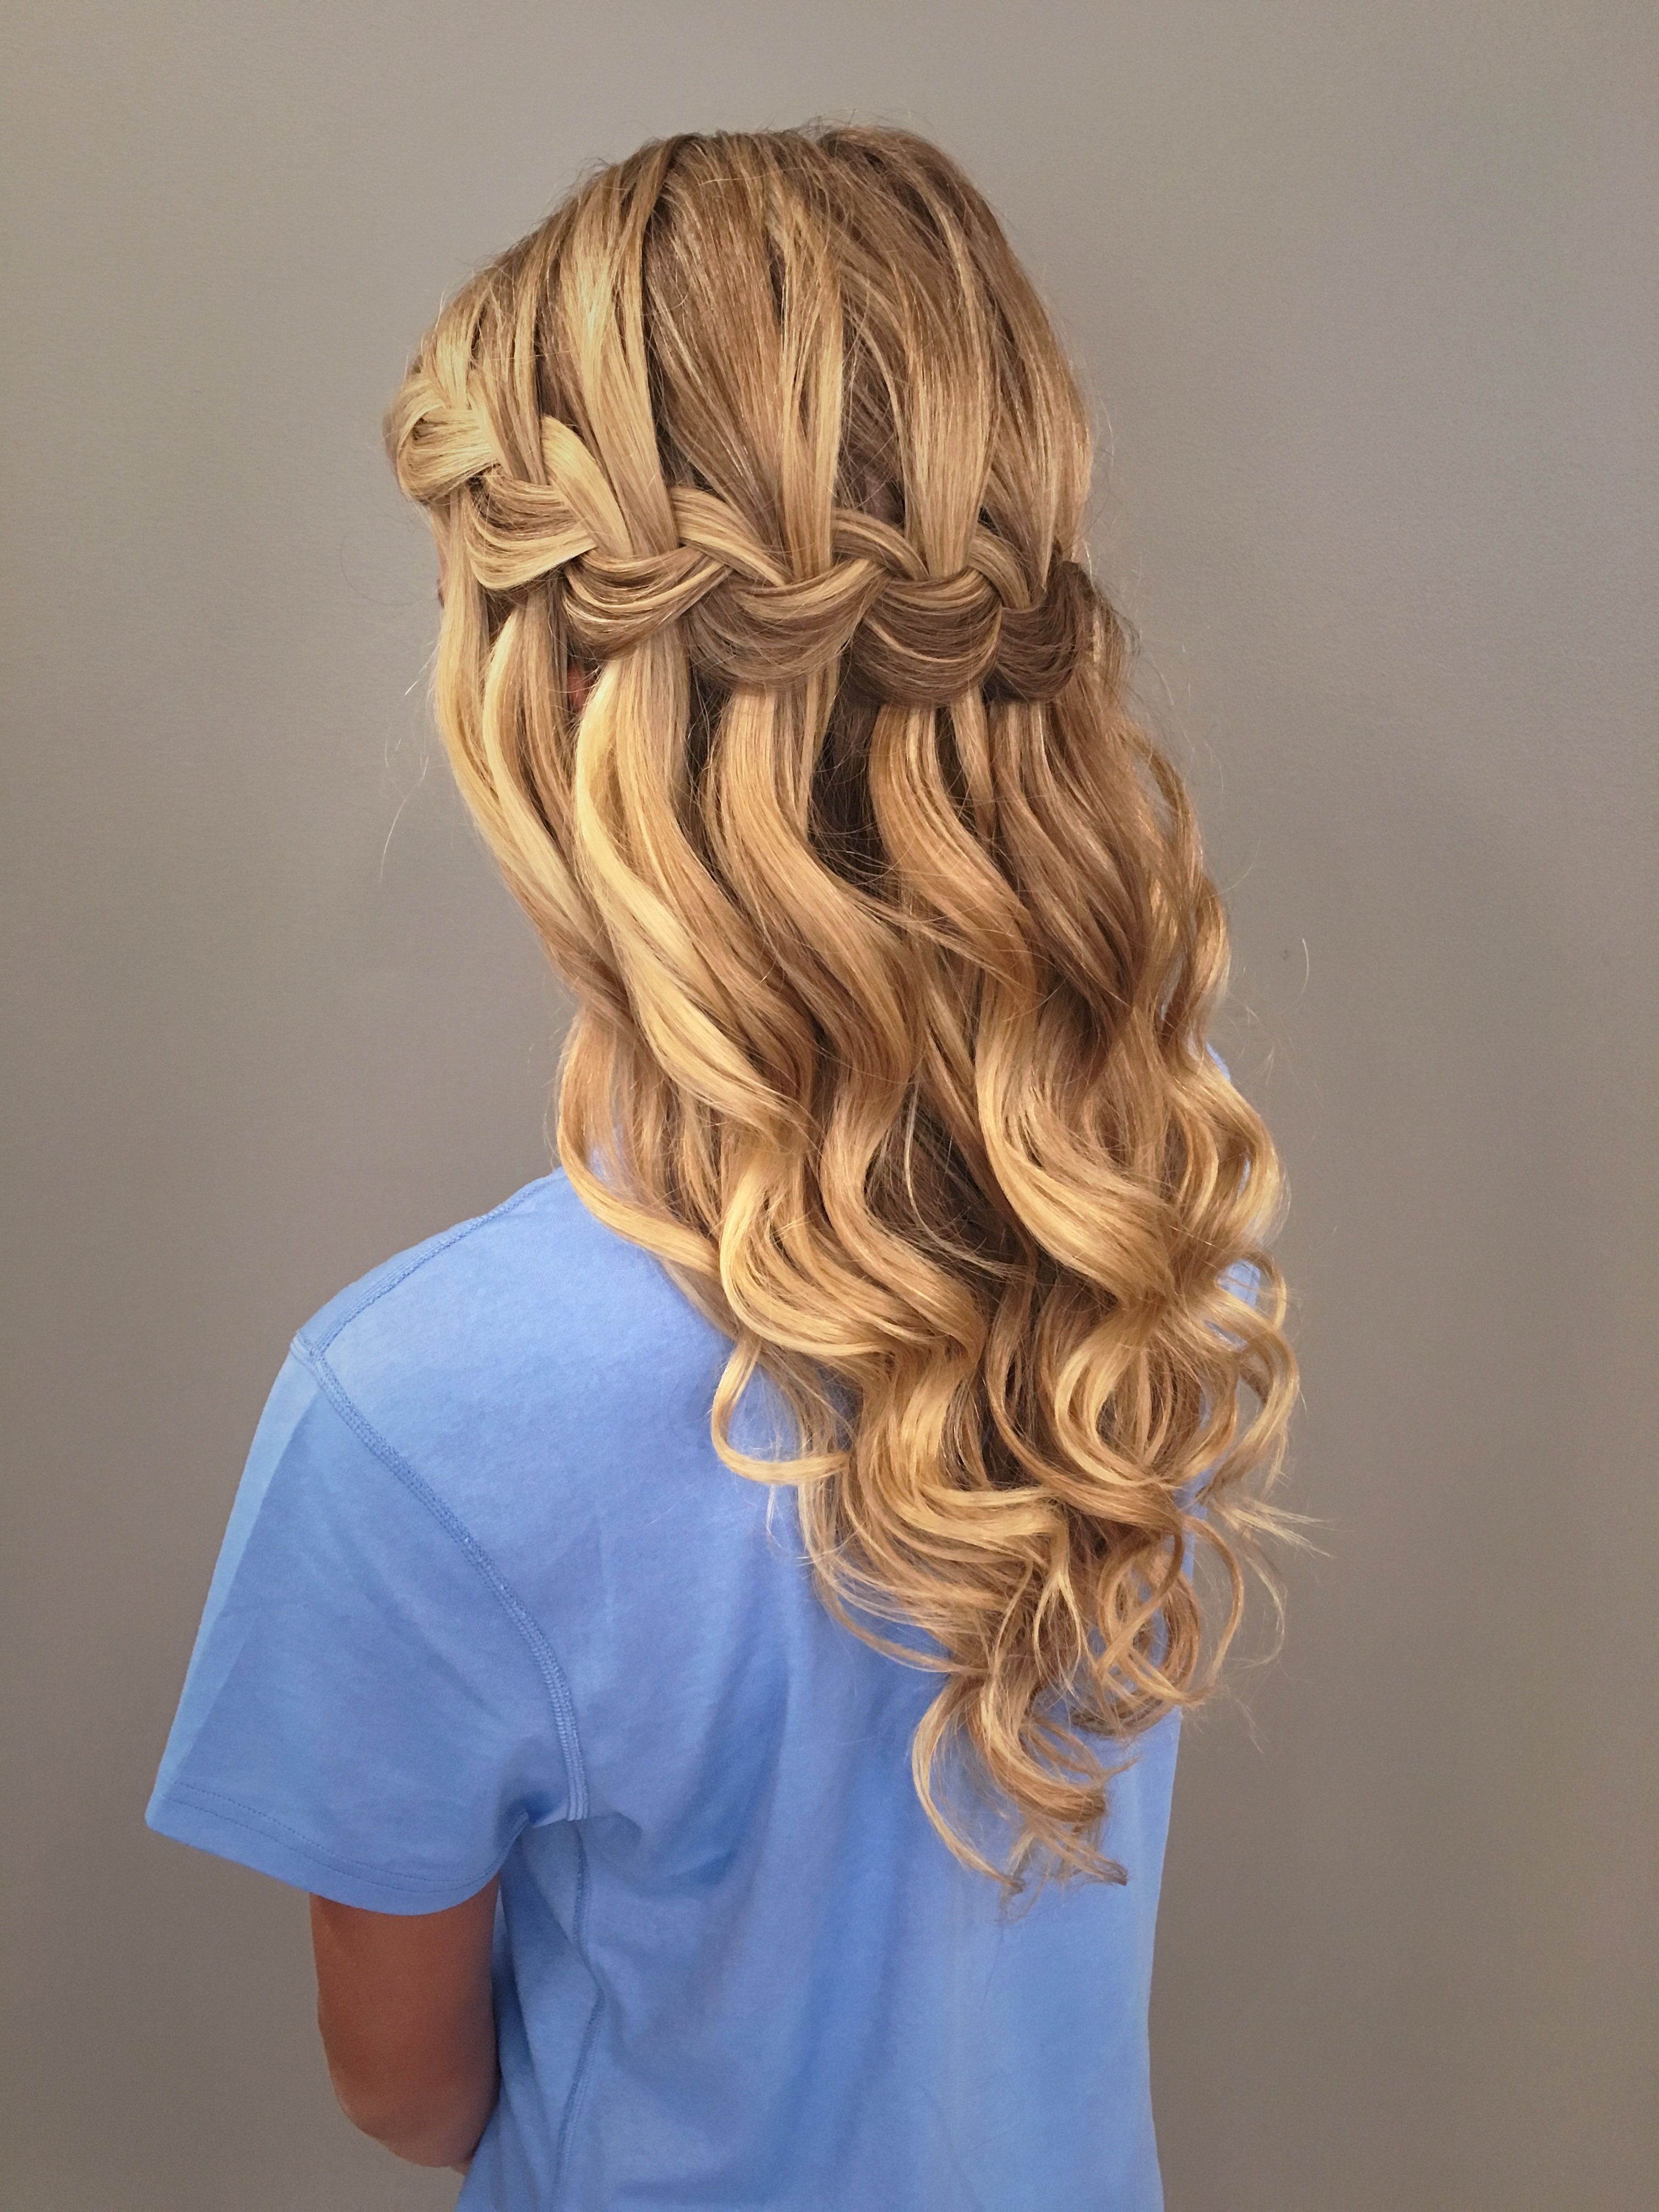 Prom Hairstyles Braid With Newest Braided Hairstyles For Homecoming (View 2 of 15)